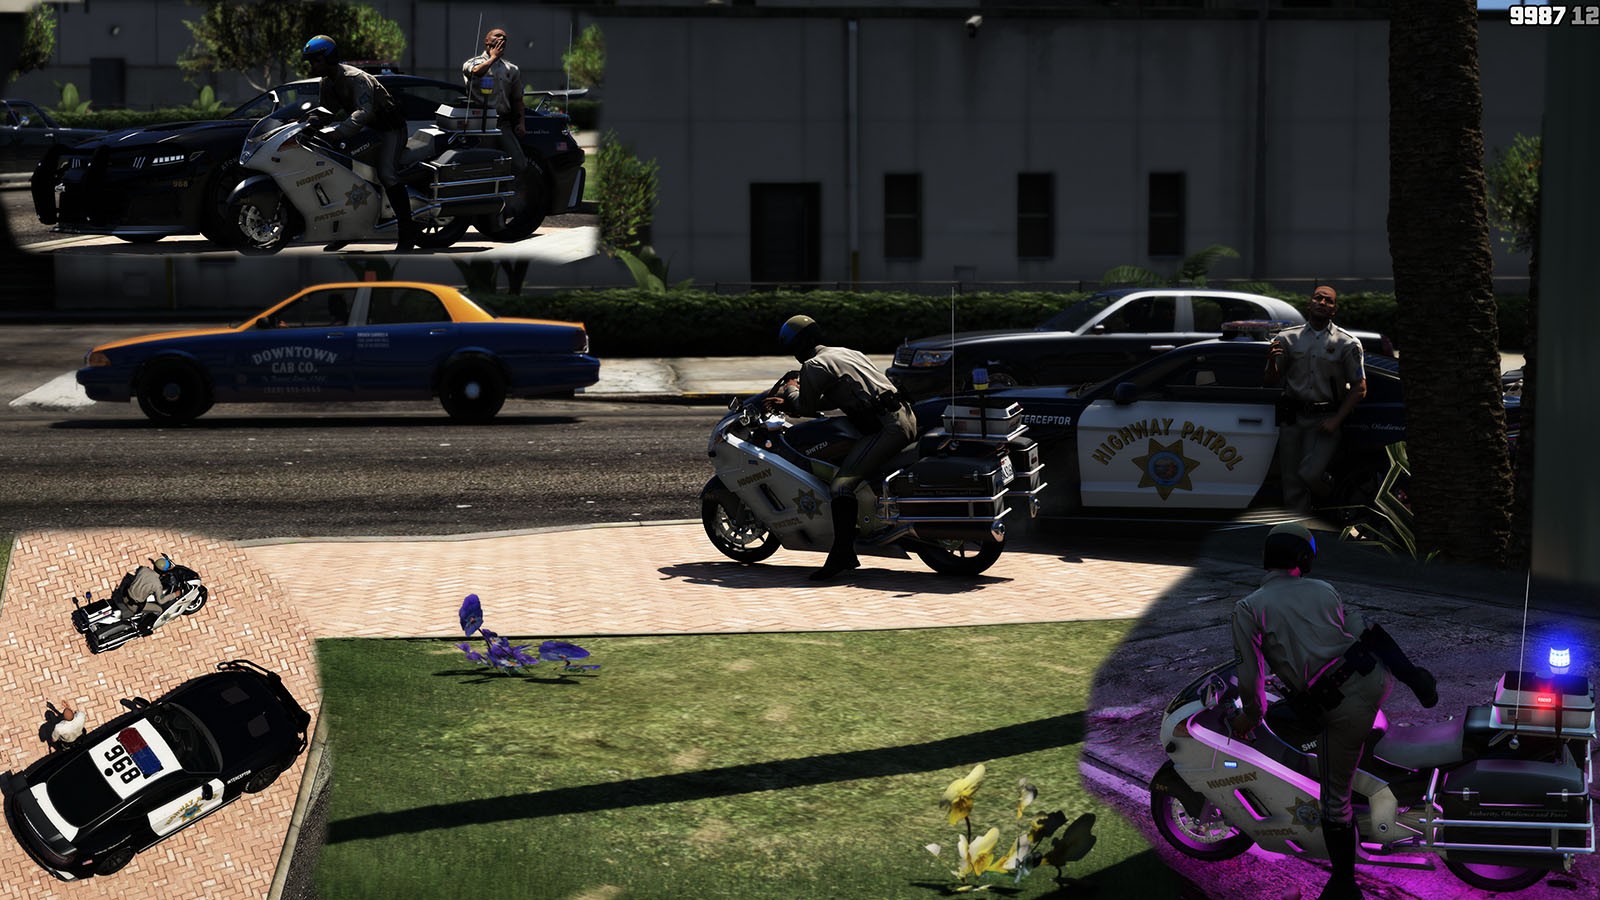 Police Version of BF400 Dirtbike - Releases - Cfx.re Community